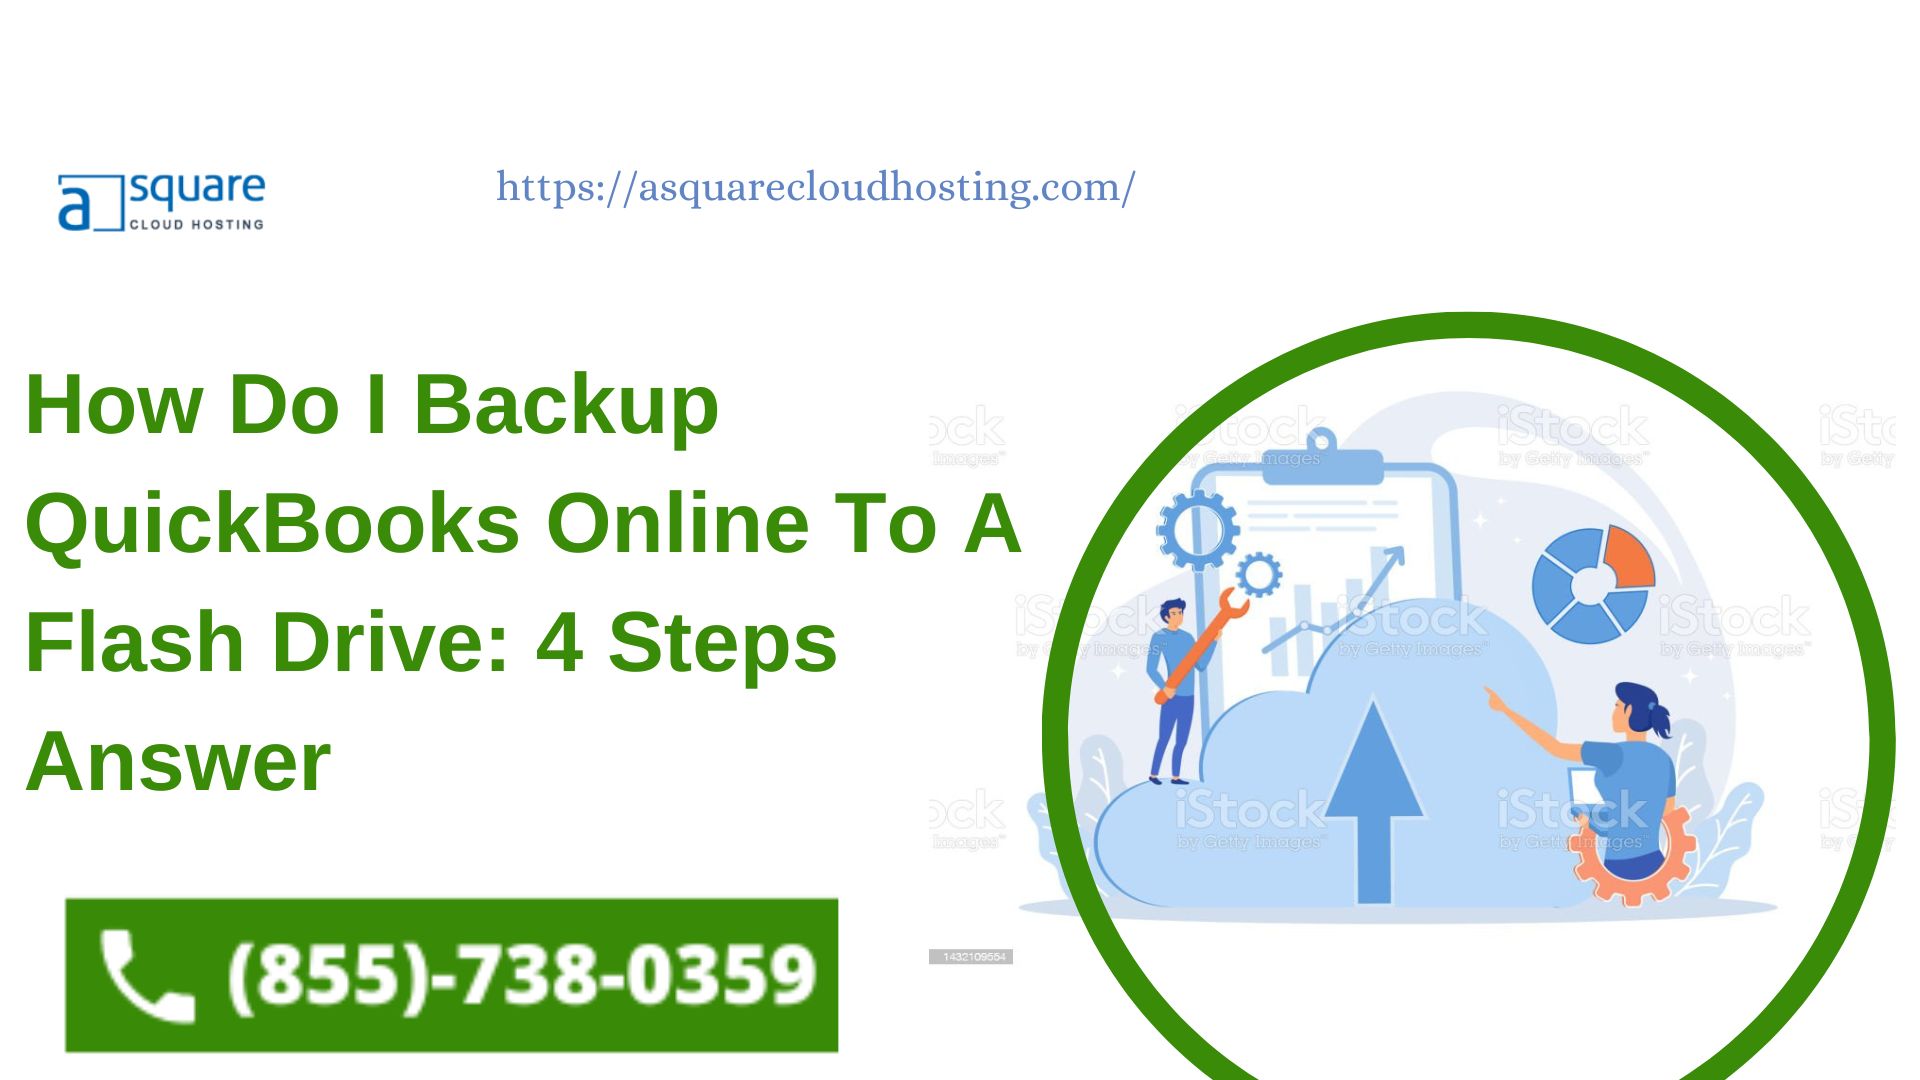 How Do I Backup QuickBooks Online To A Flash Drive: 4 Steps Answer